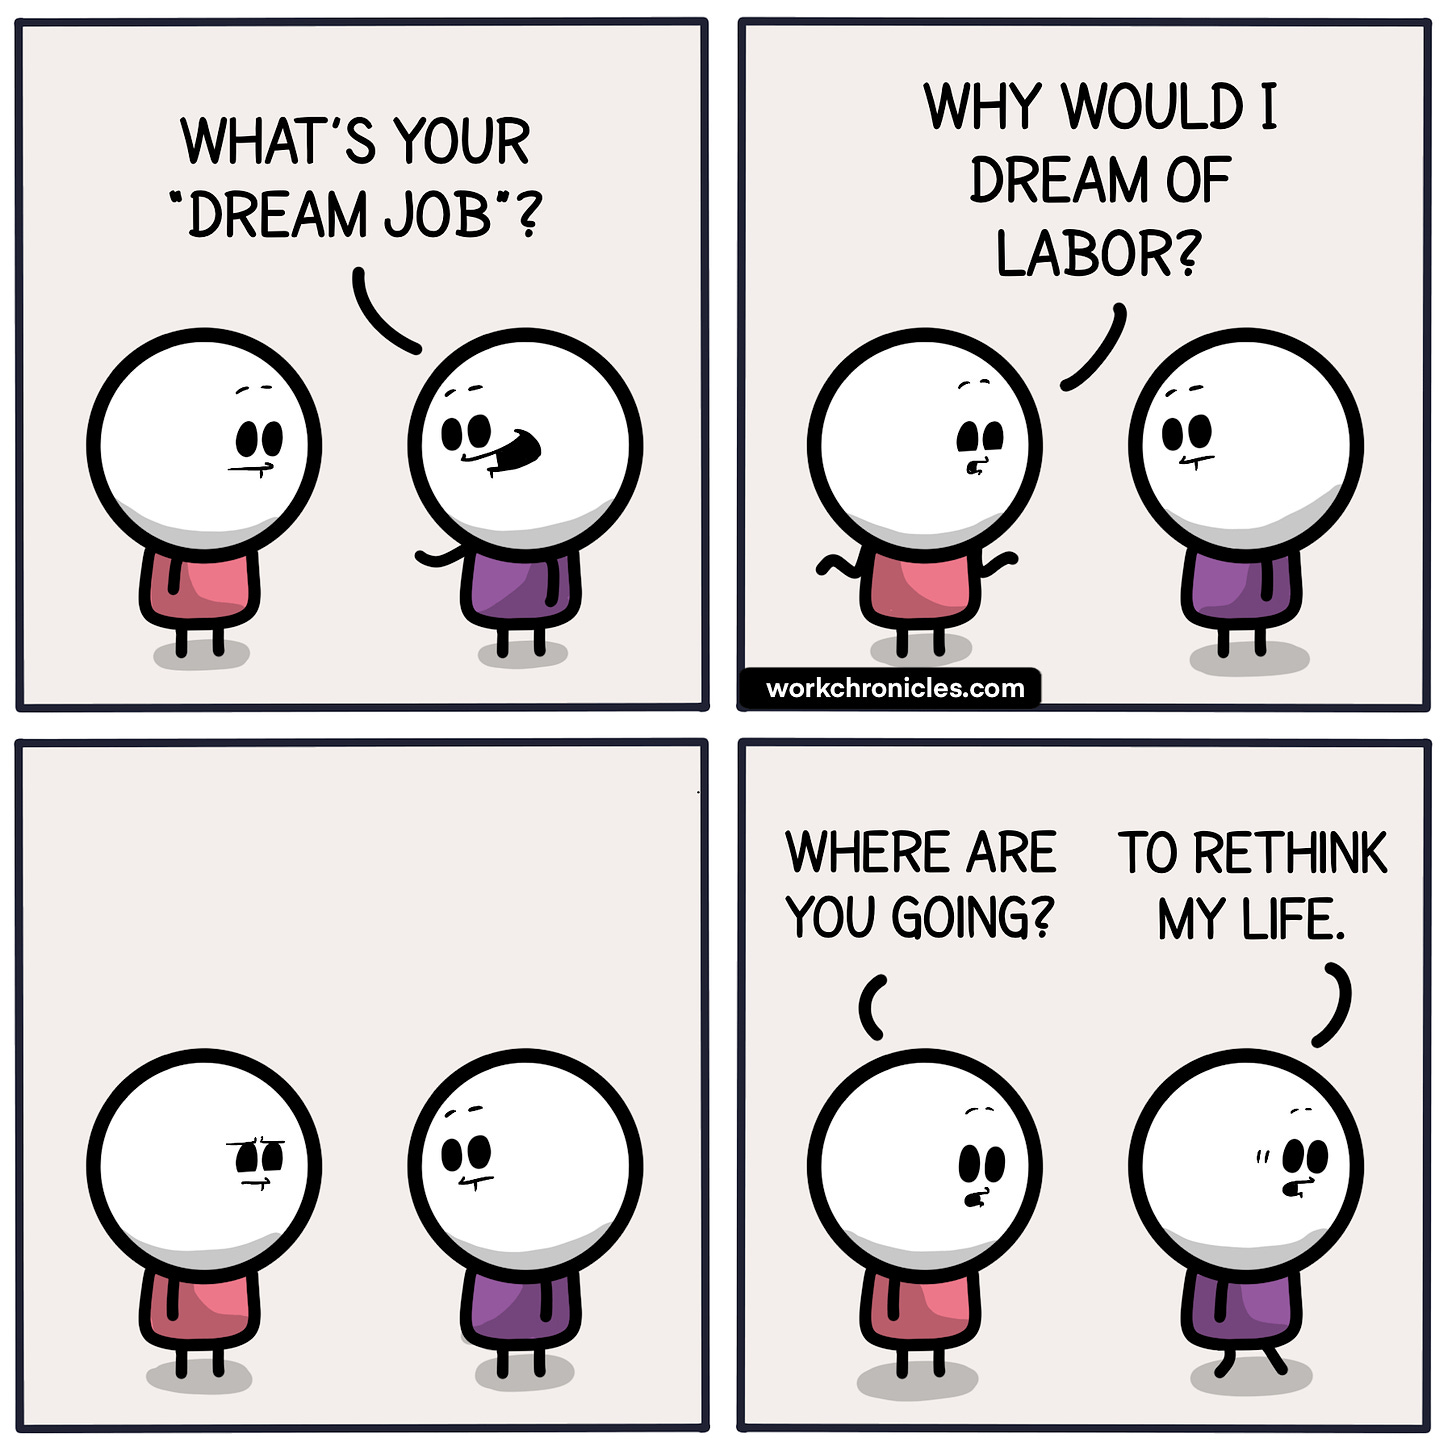 In a 4-panel comic strip, one worker asks the other, "What's your Dream Job?" The other says, "Why would I dream of labor?" then asks, "Where are you going?" The first one says, "To Rethink my life," as they walk away.